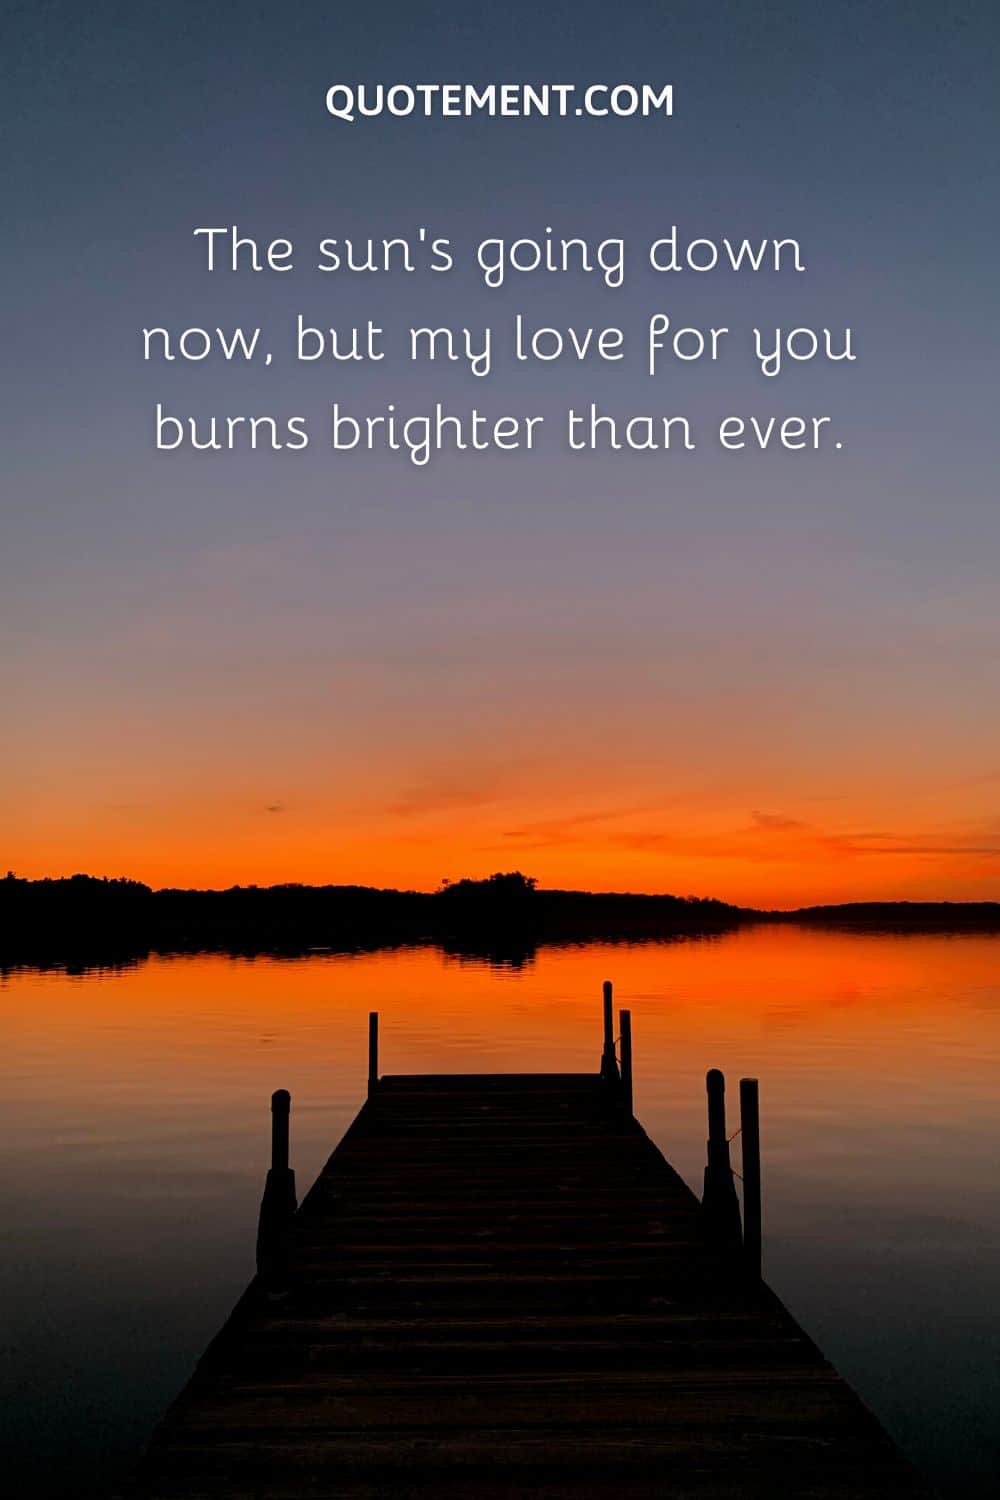 The sun’s going down now, but my love for you burns brighter than ever.